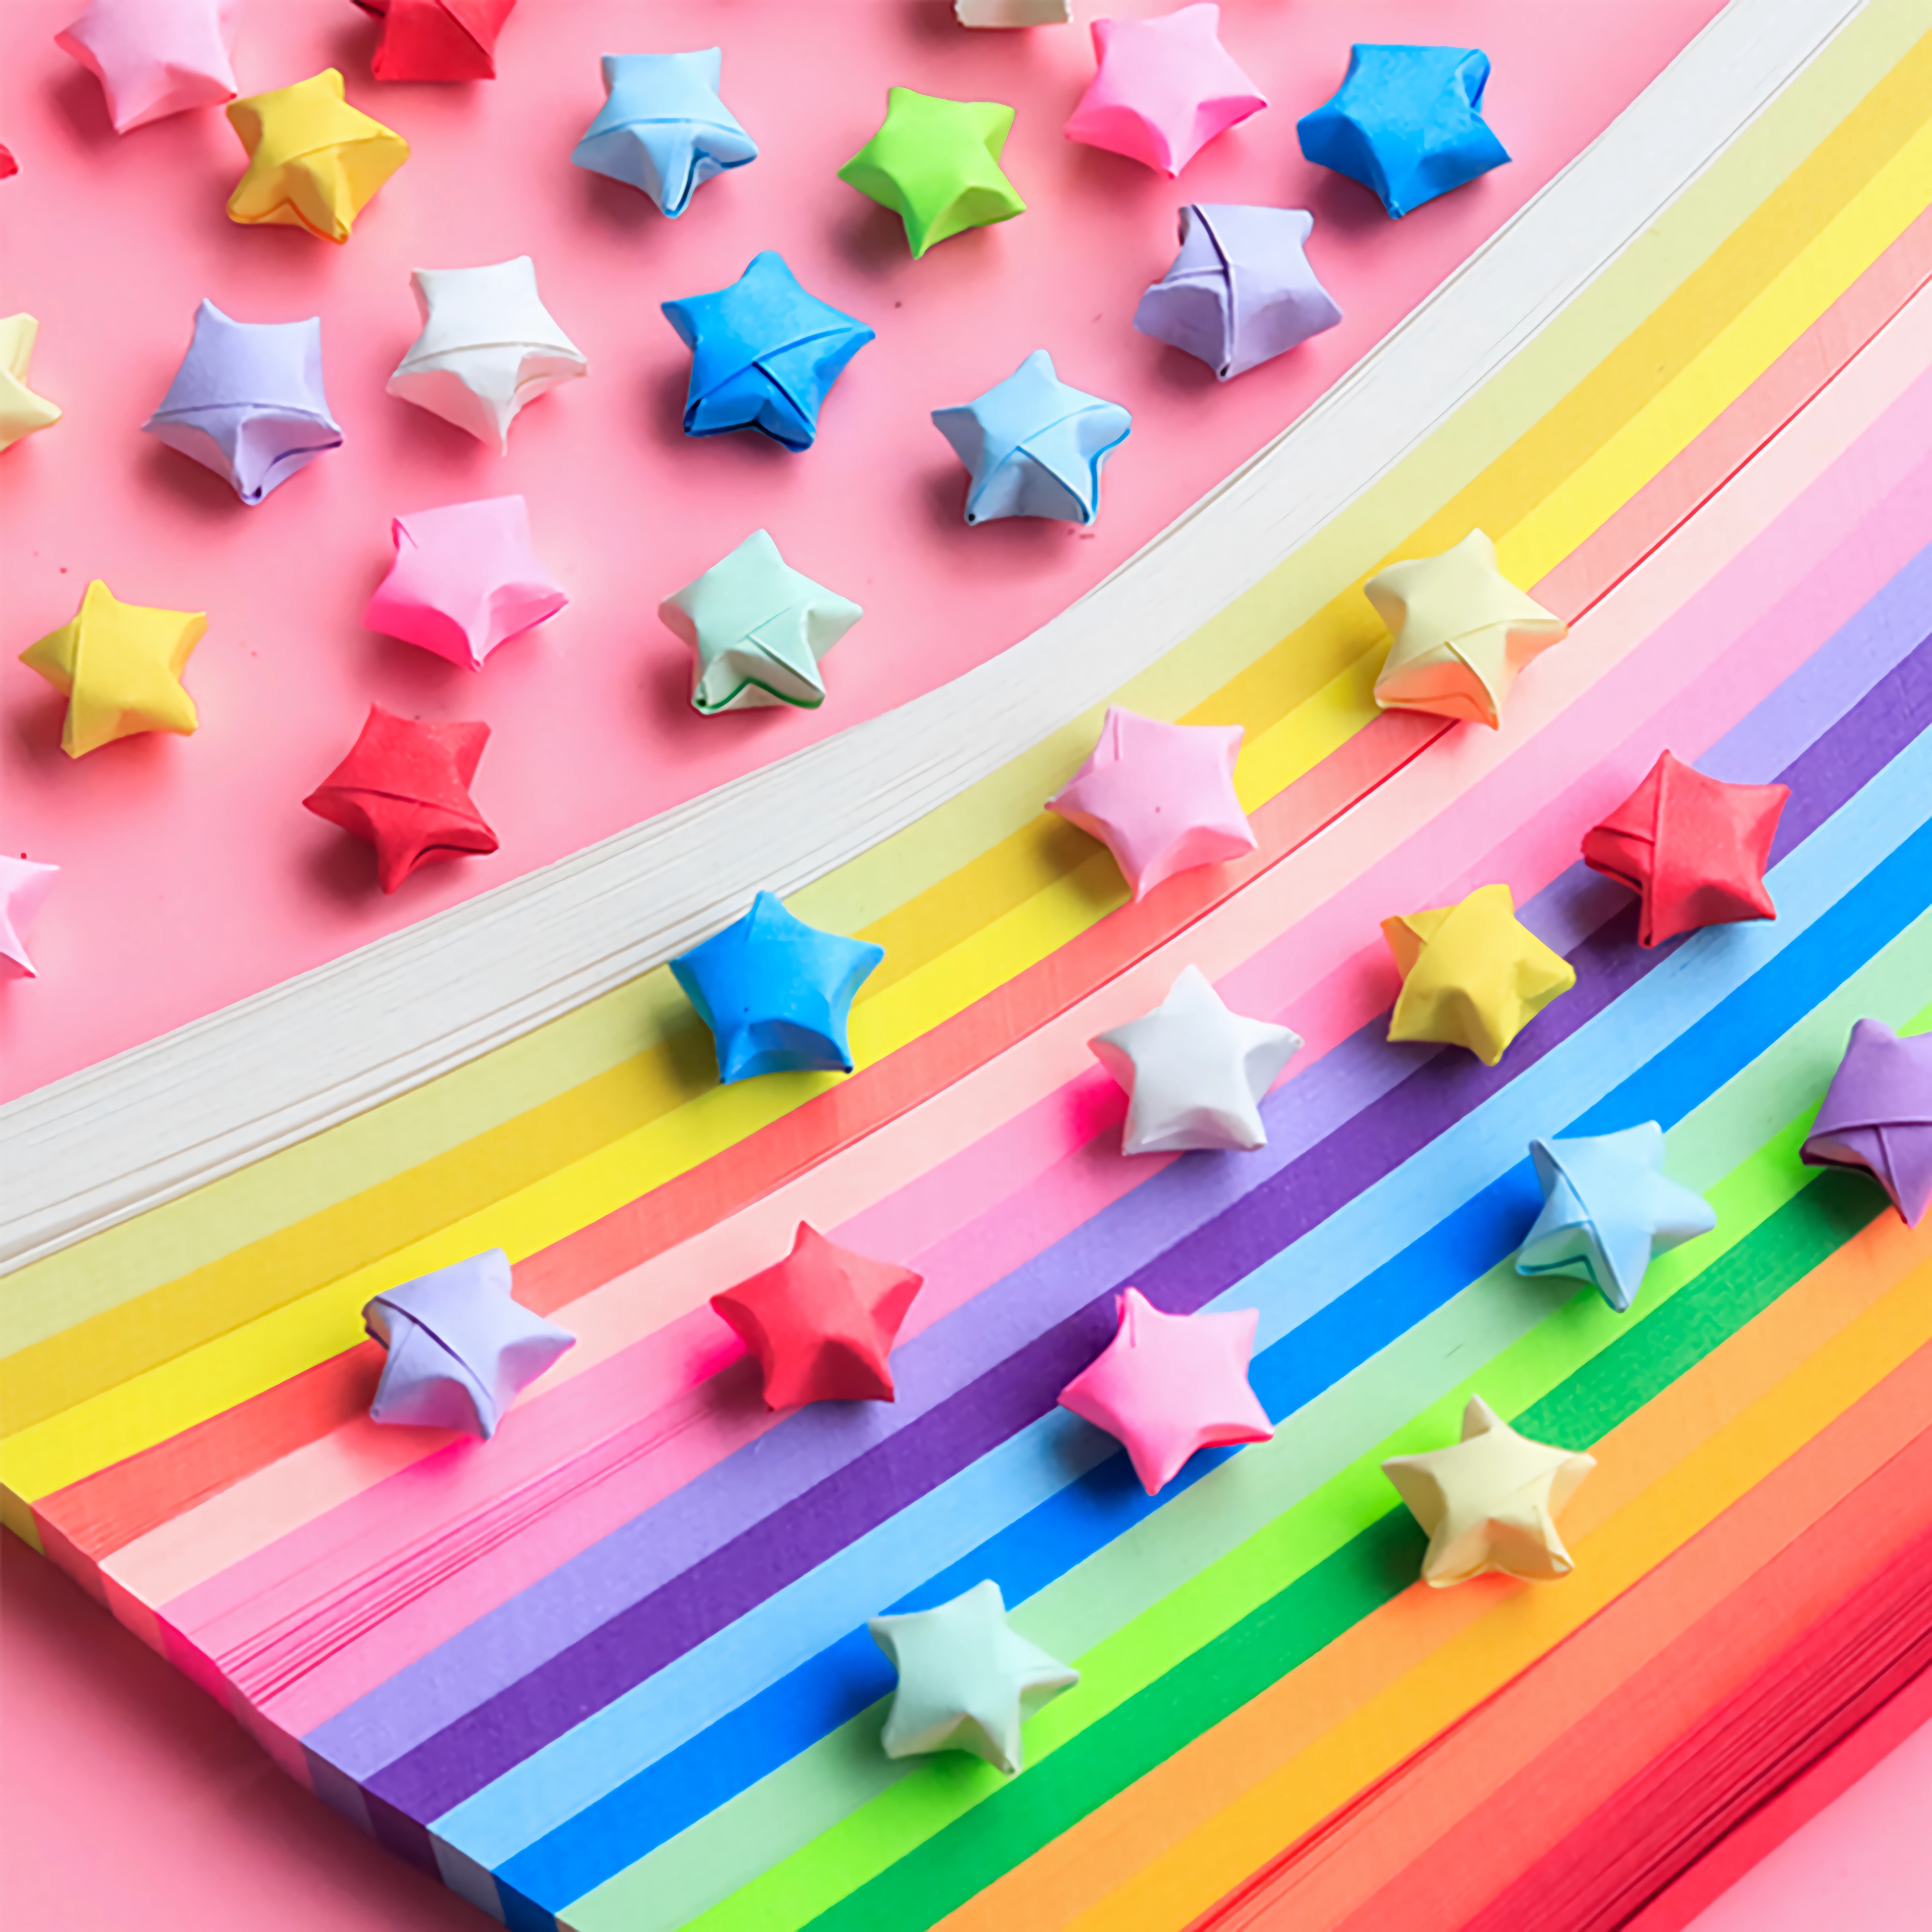 Origami Stars Papers 1000 Paper Strips in Assorted Colors: 10 Colors - 1000 Sheets - Easy Instructions for Origami Lucky Stars